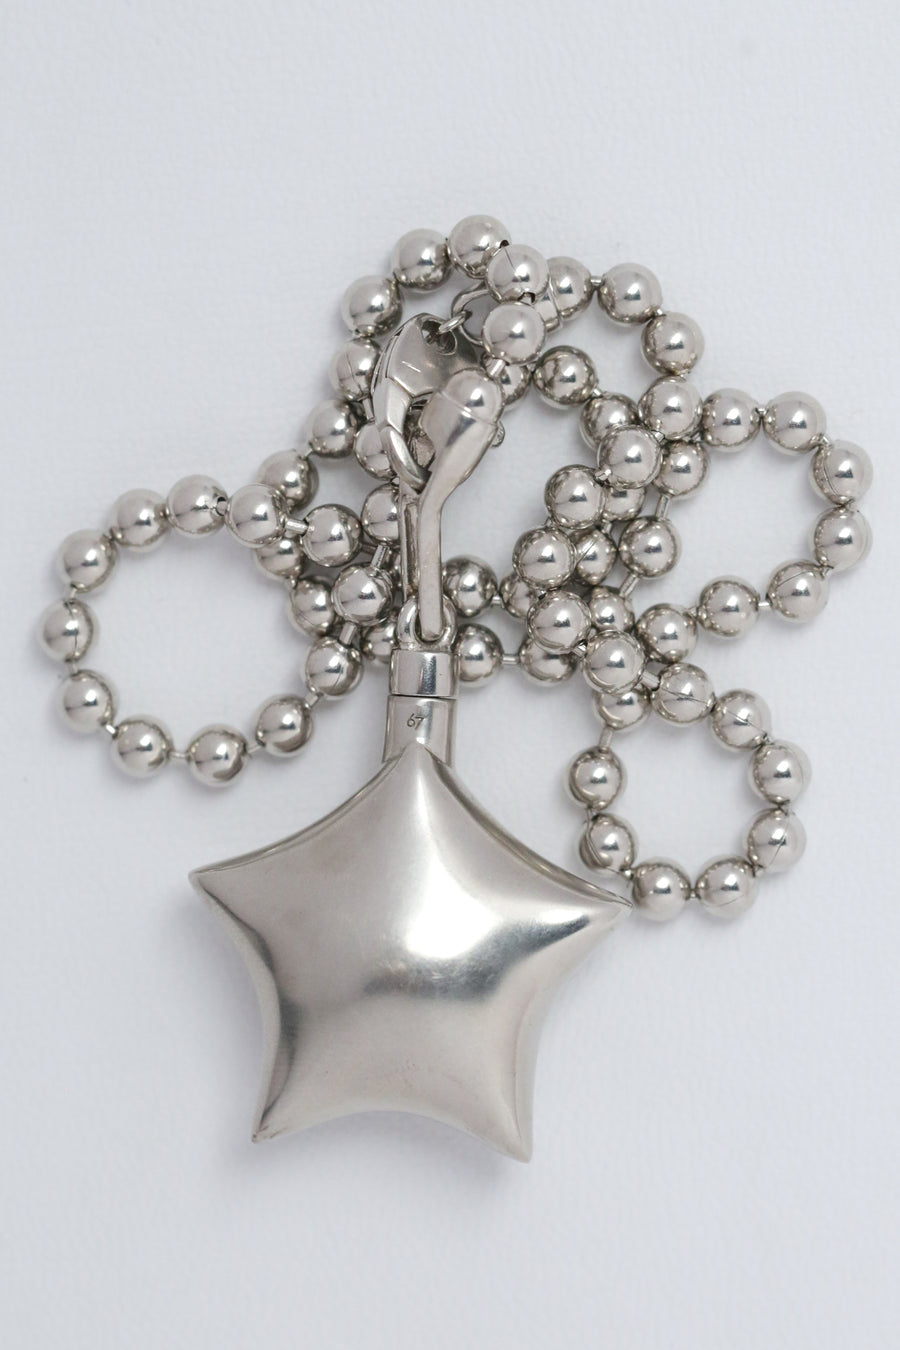 Star Necklace II